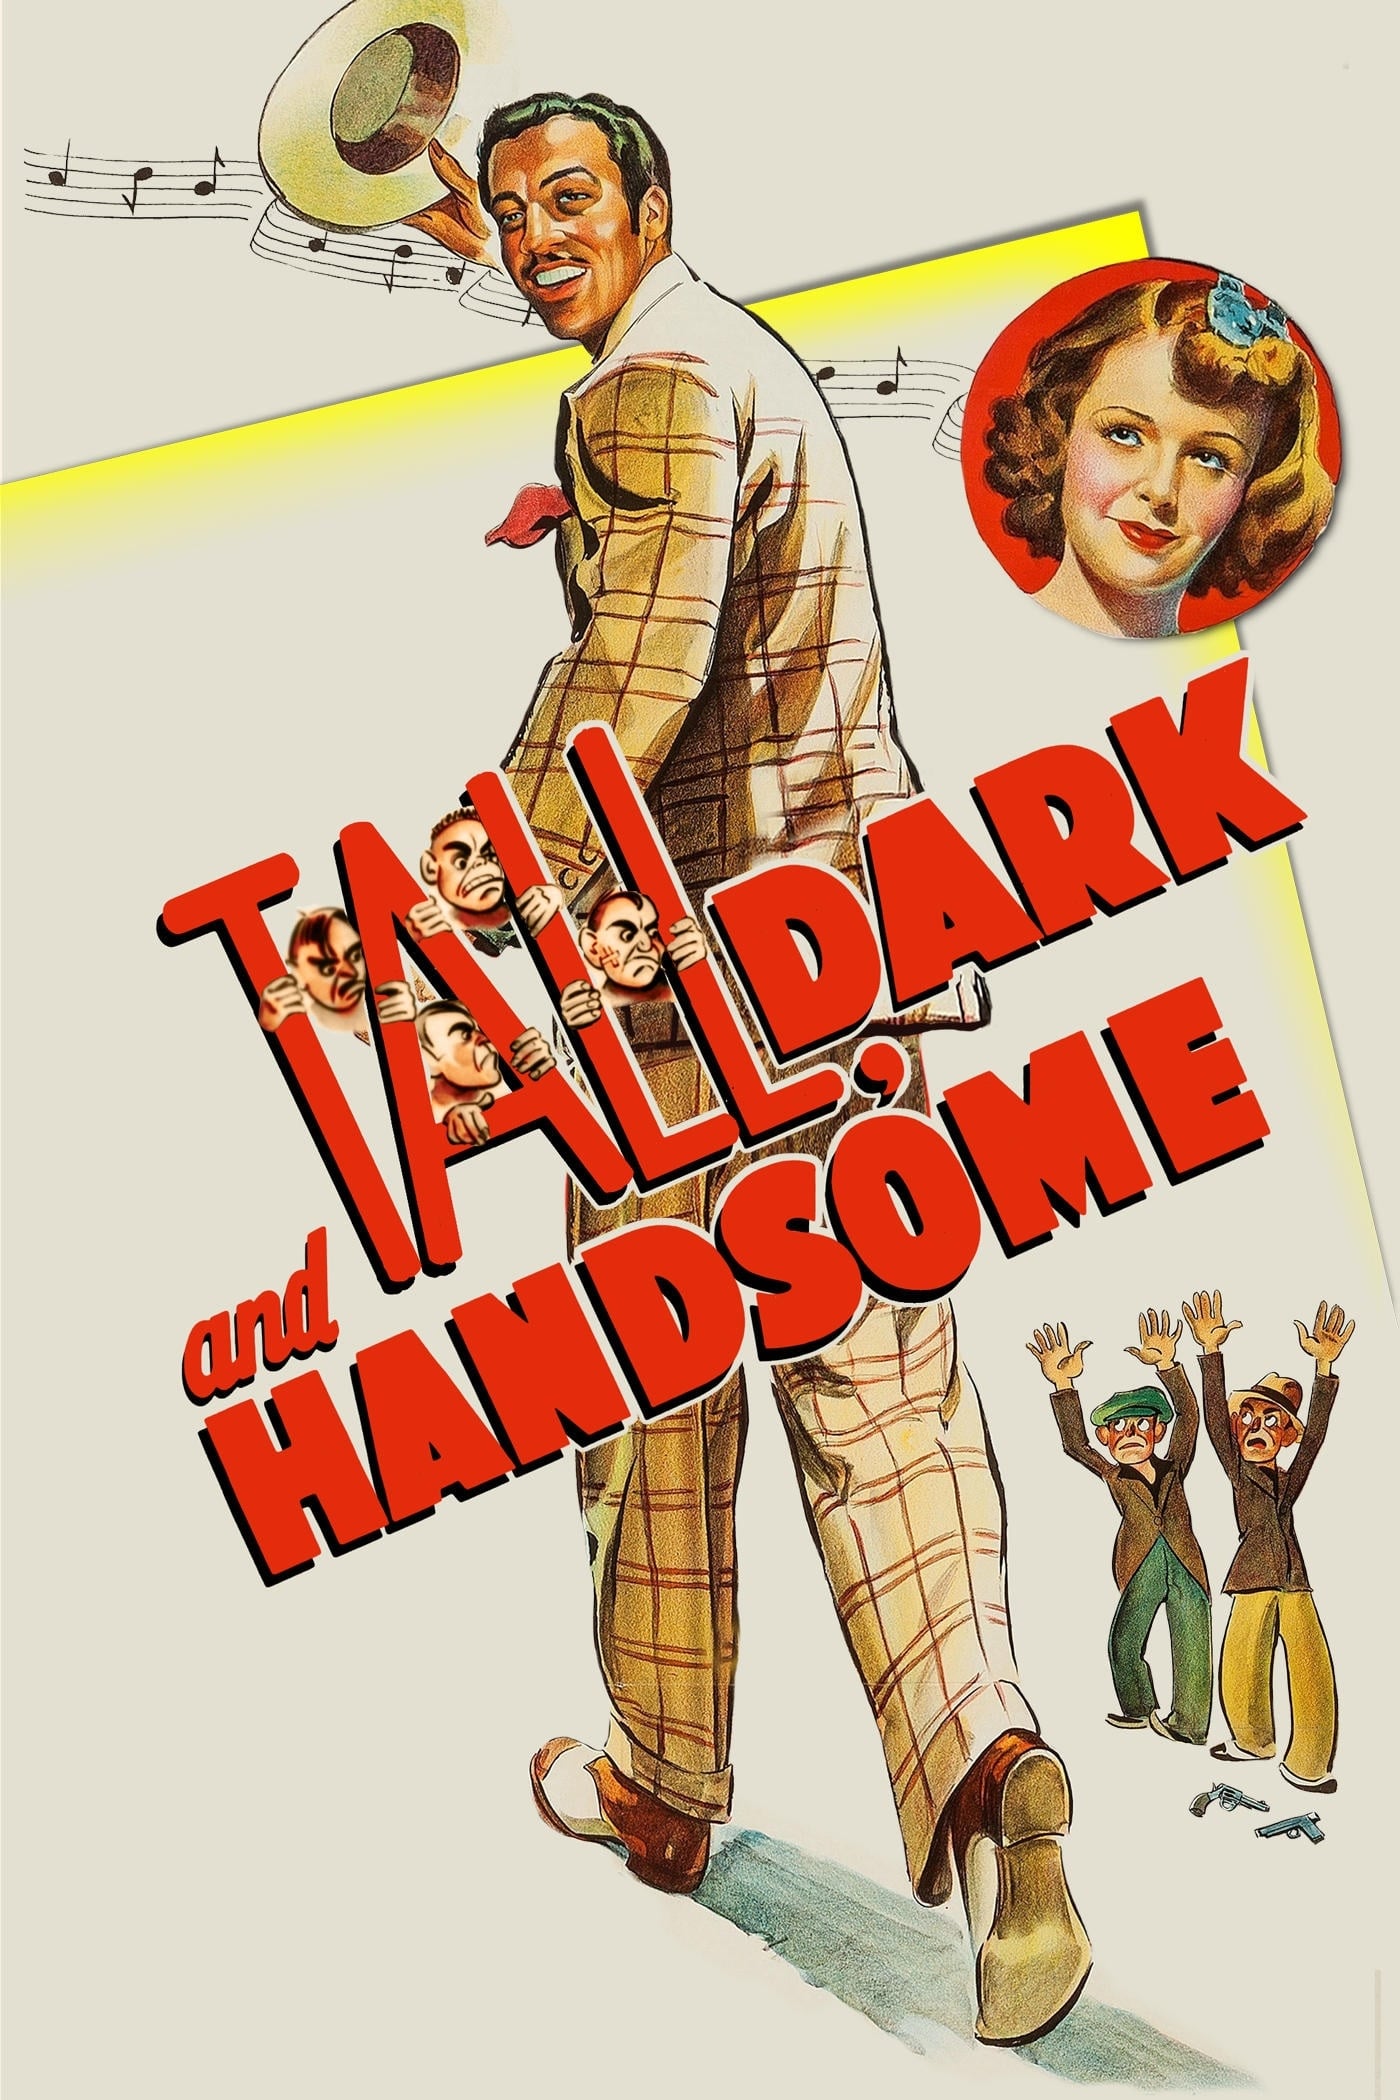 Tall, Dark and Handsome (1941)